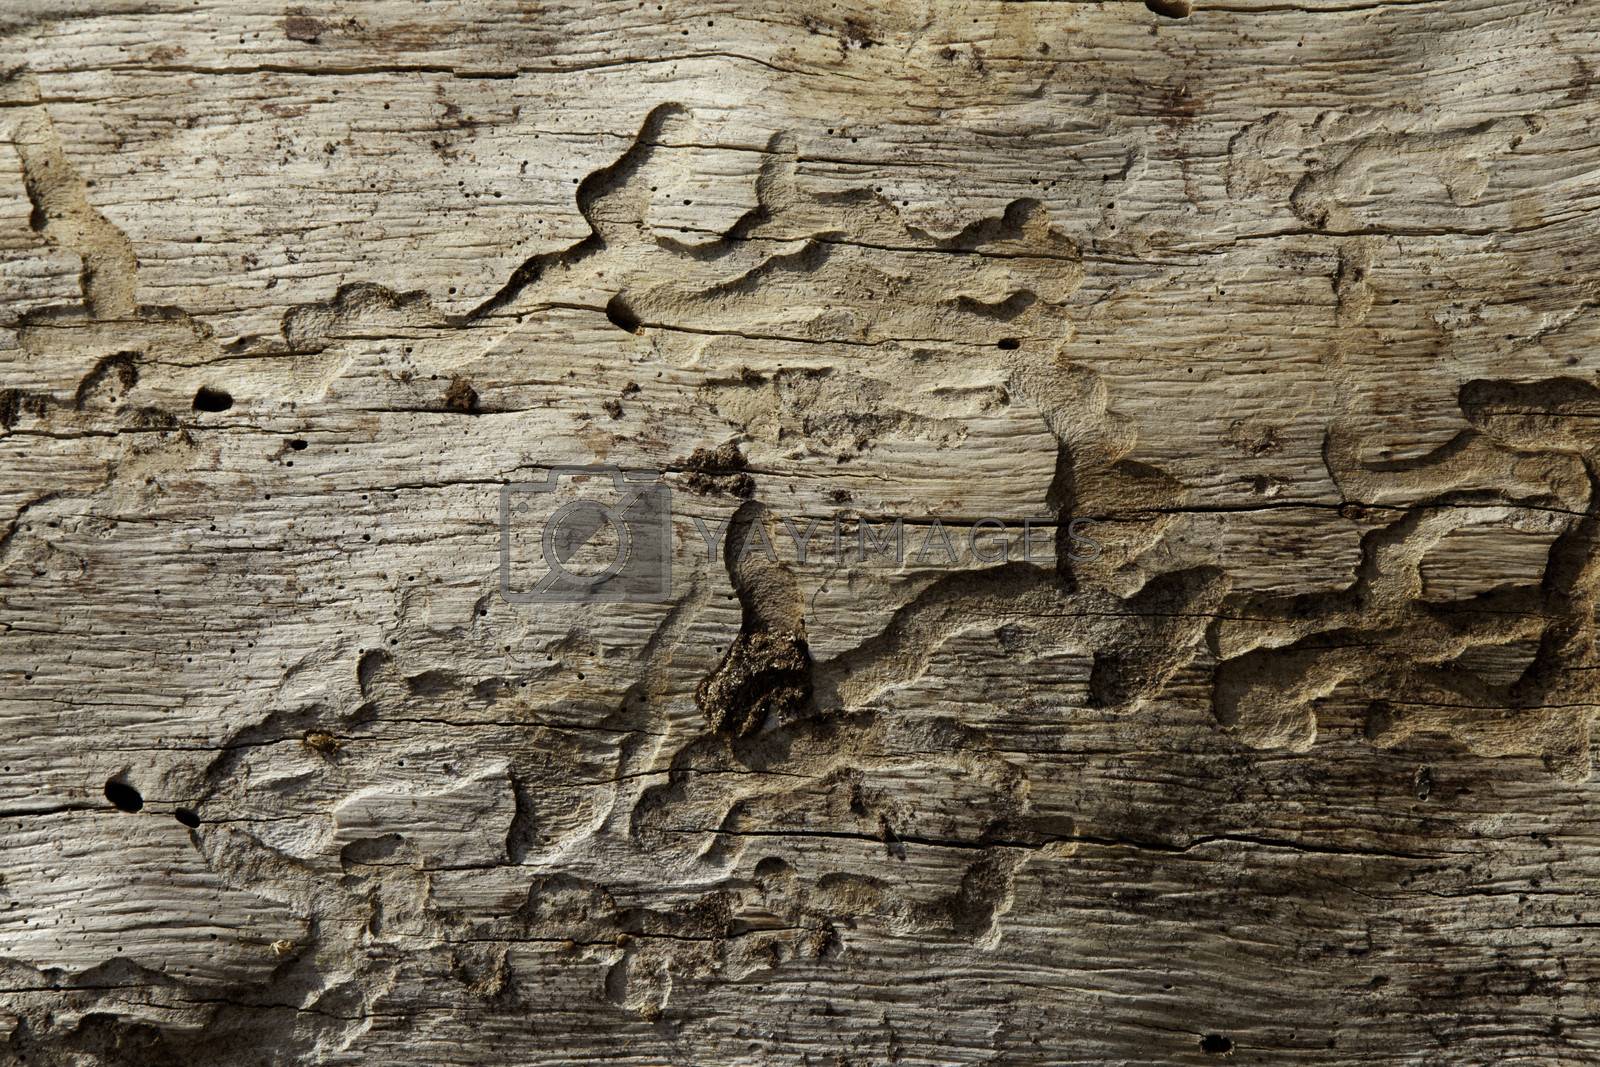 Royalty free image of Close-up shot of wood grain pattern by moodboard